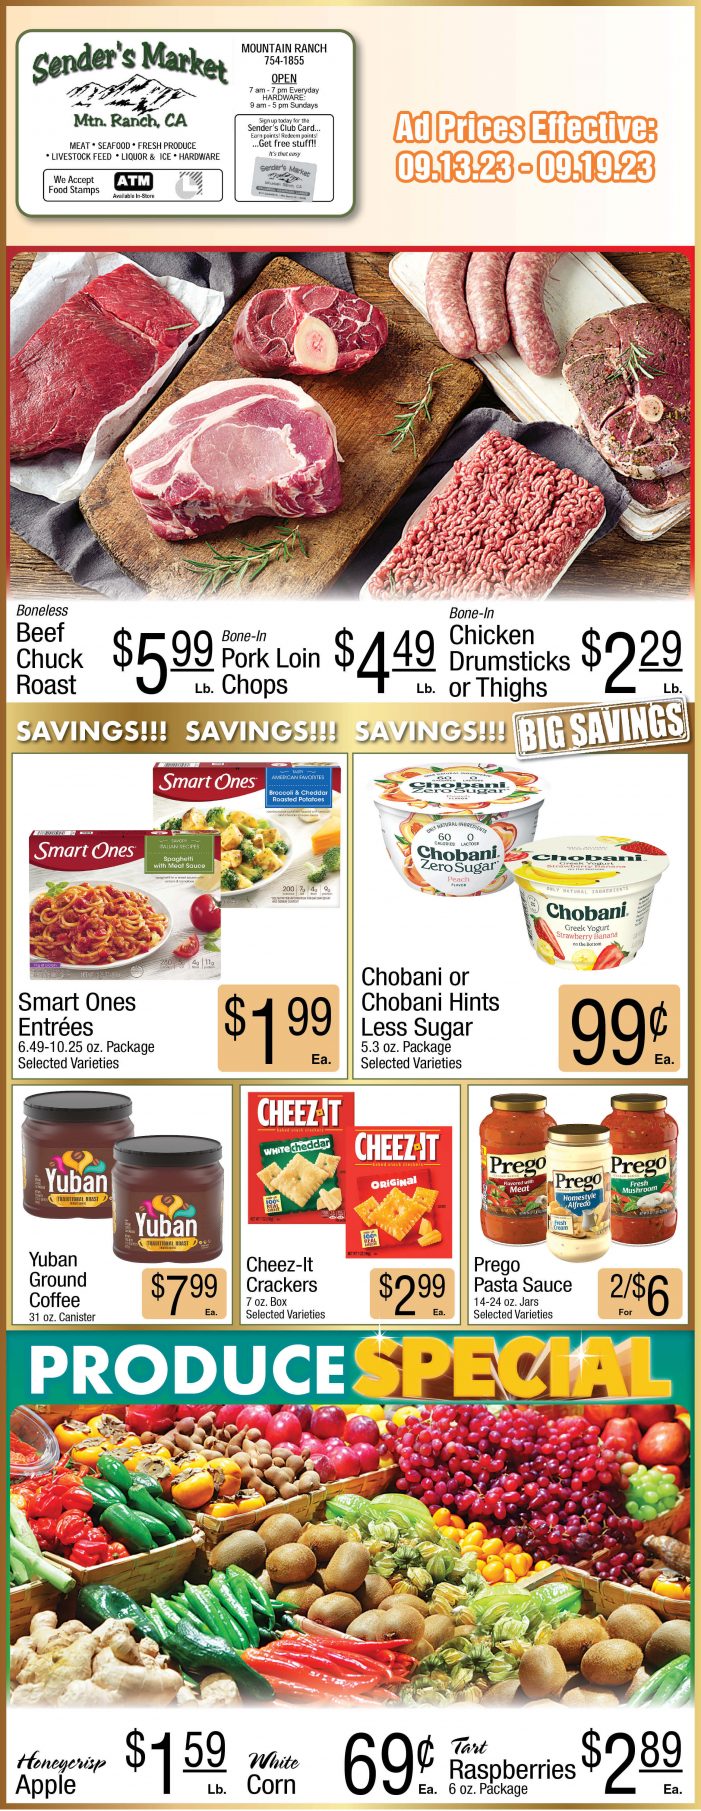 Sender’s Market Weekly Ad & Grocery Specials Through September 19th! Shop Local & Save!!